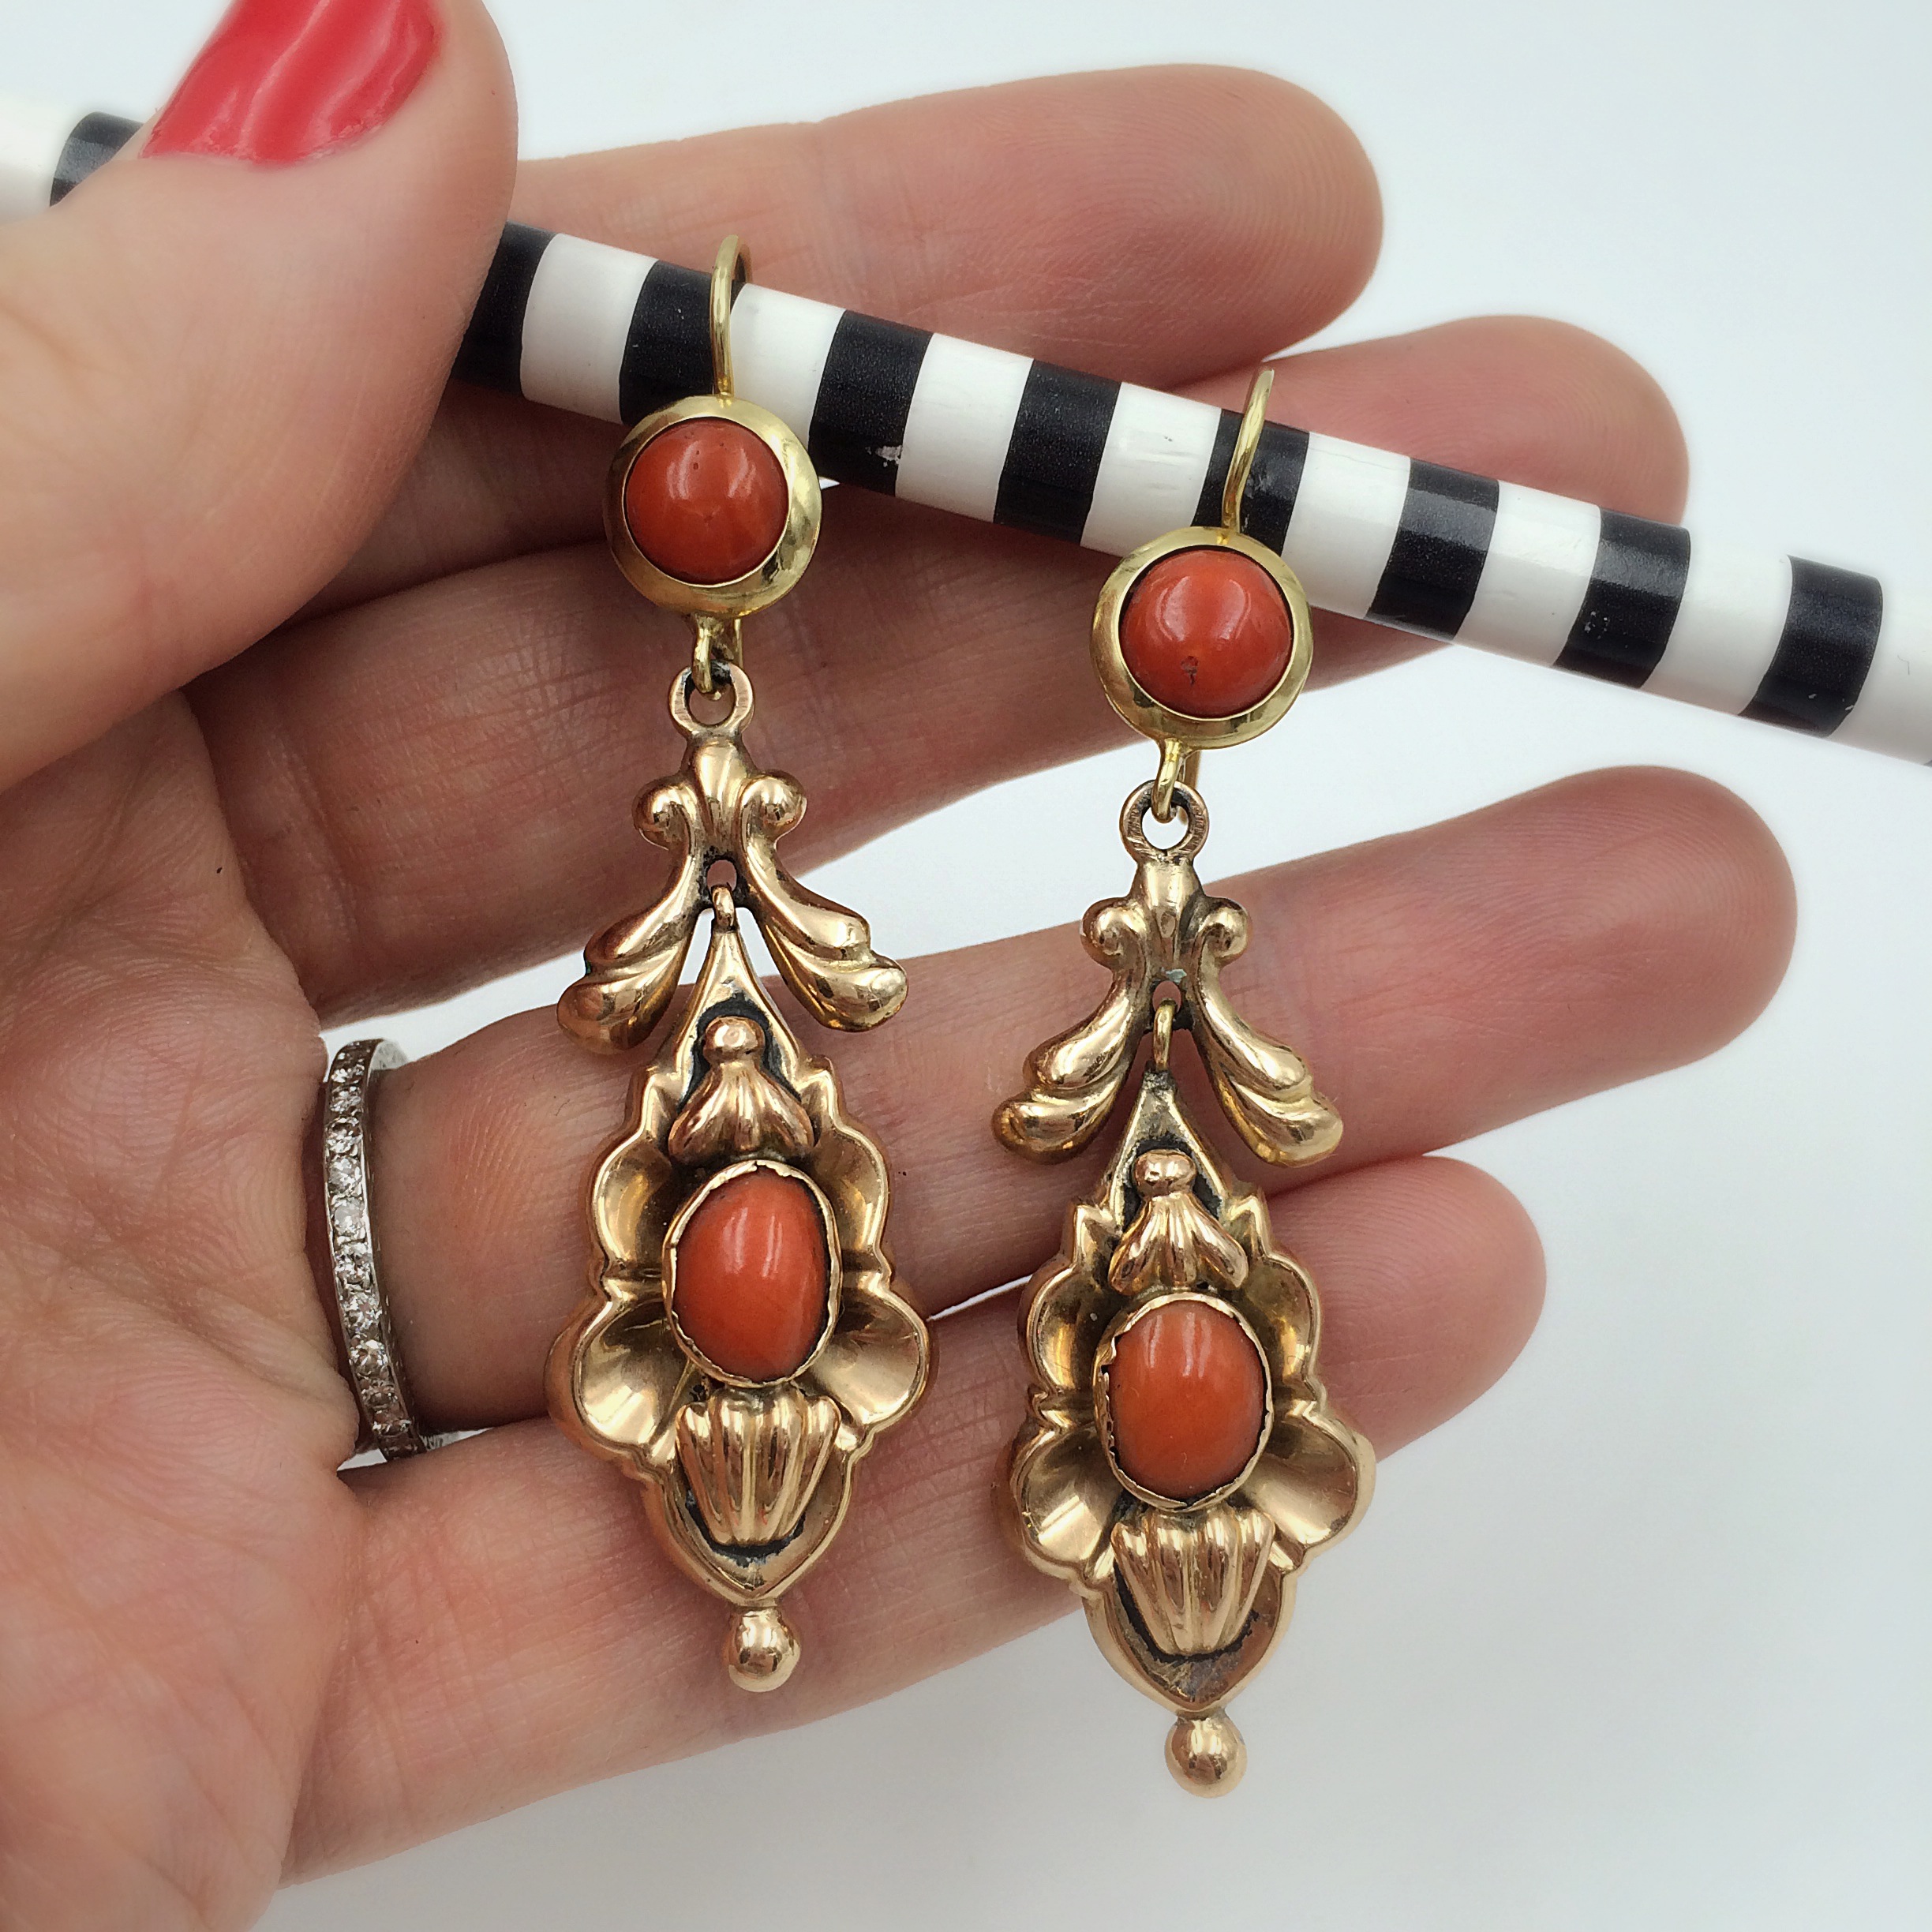 antique coral earrings at Reverie vintage NYC